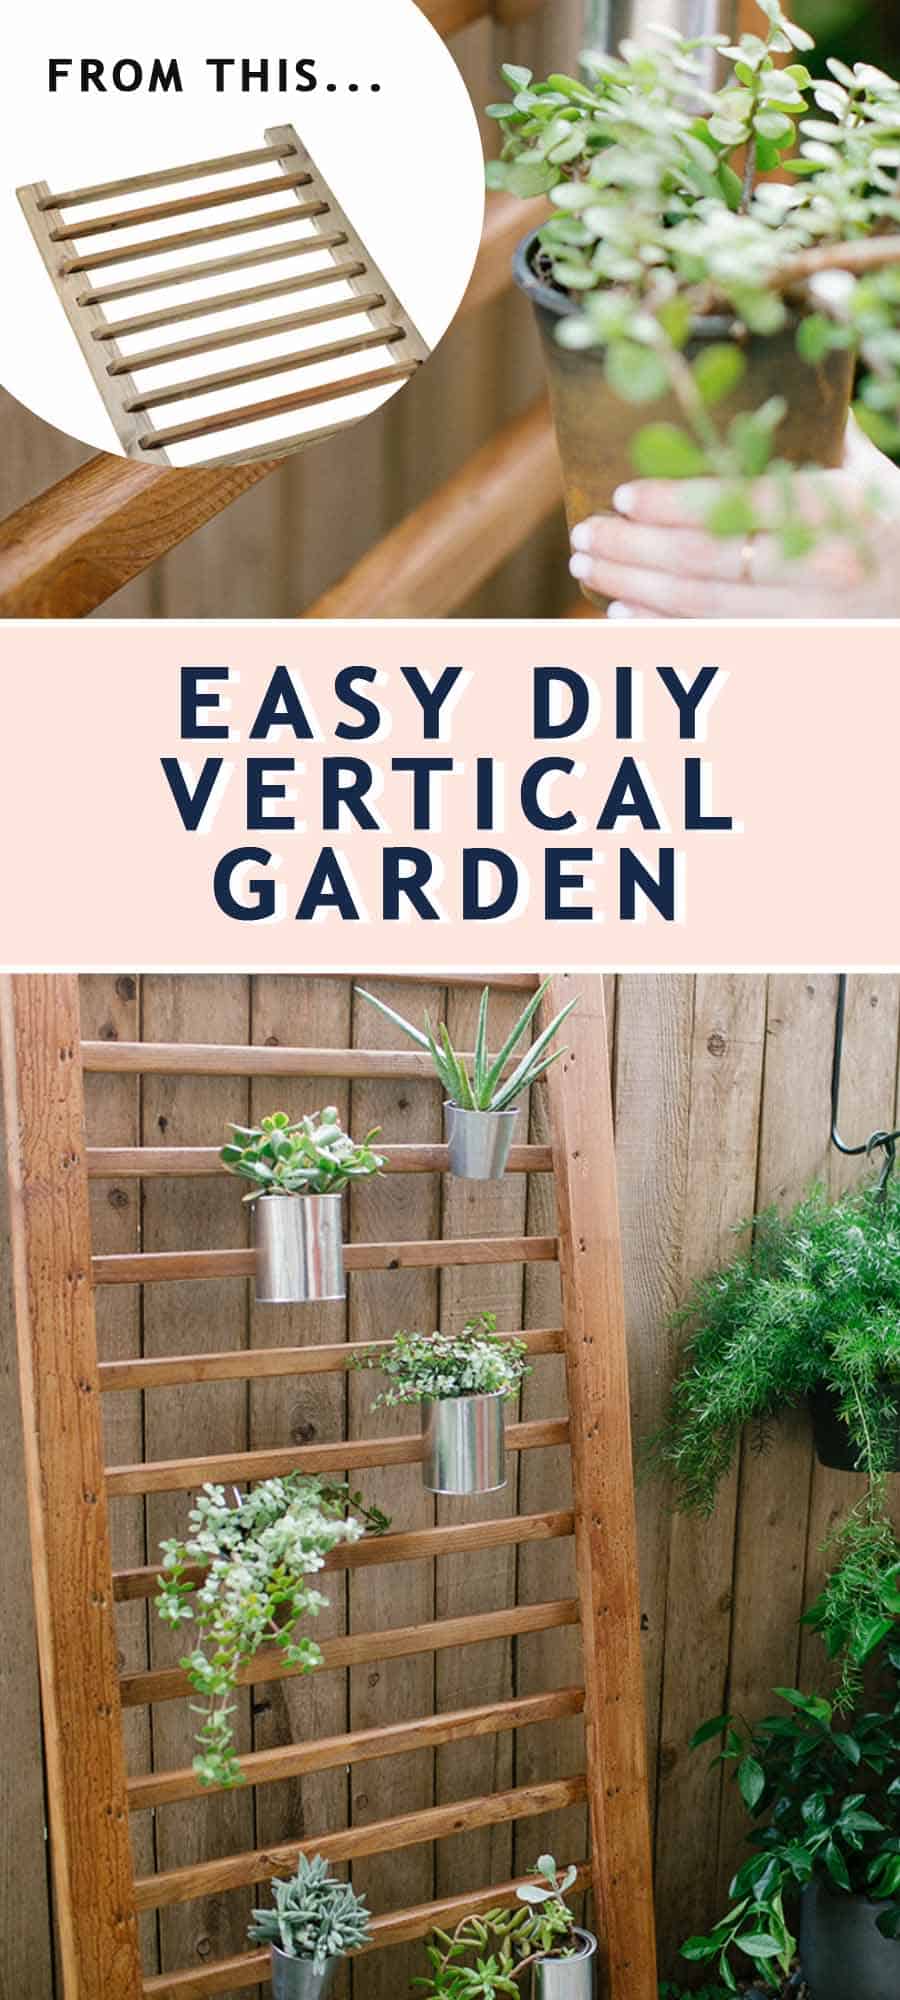 two photos together of a backyard area with a wooden handrail as a diy vertical garden